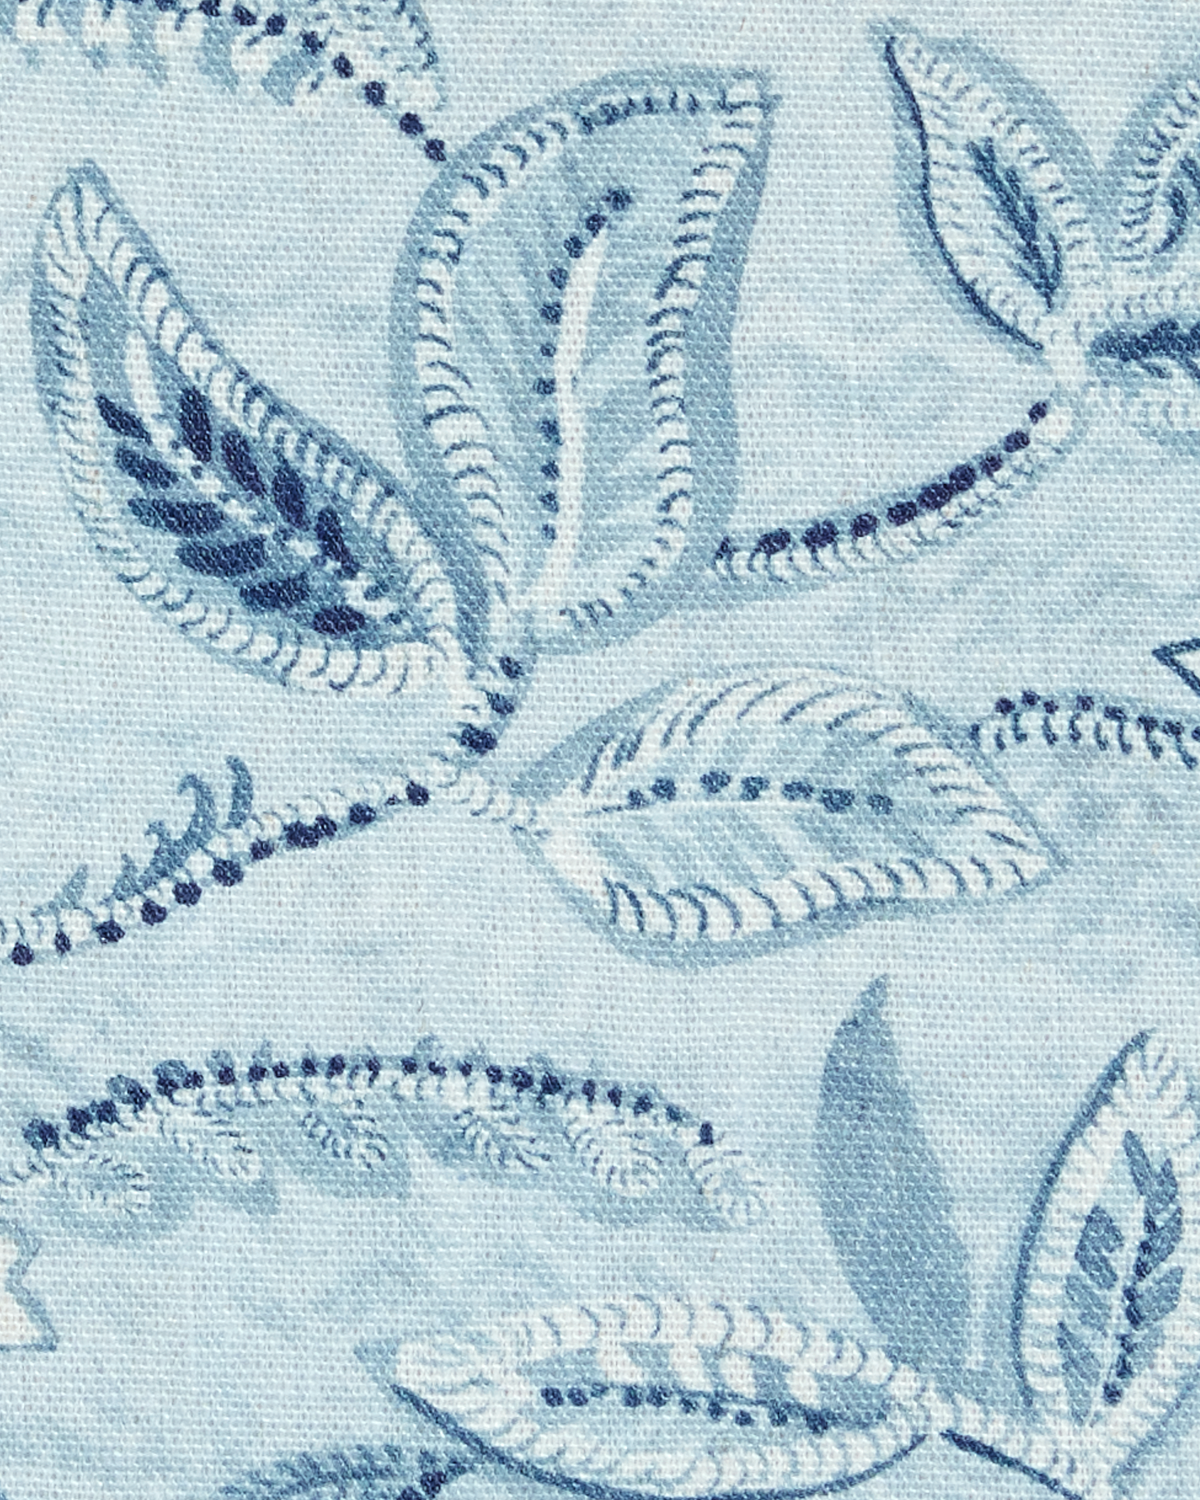 Textured Botanical Fabric in Light Blues